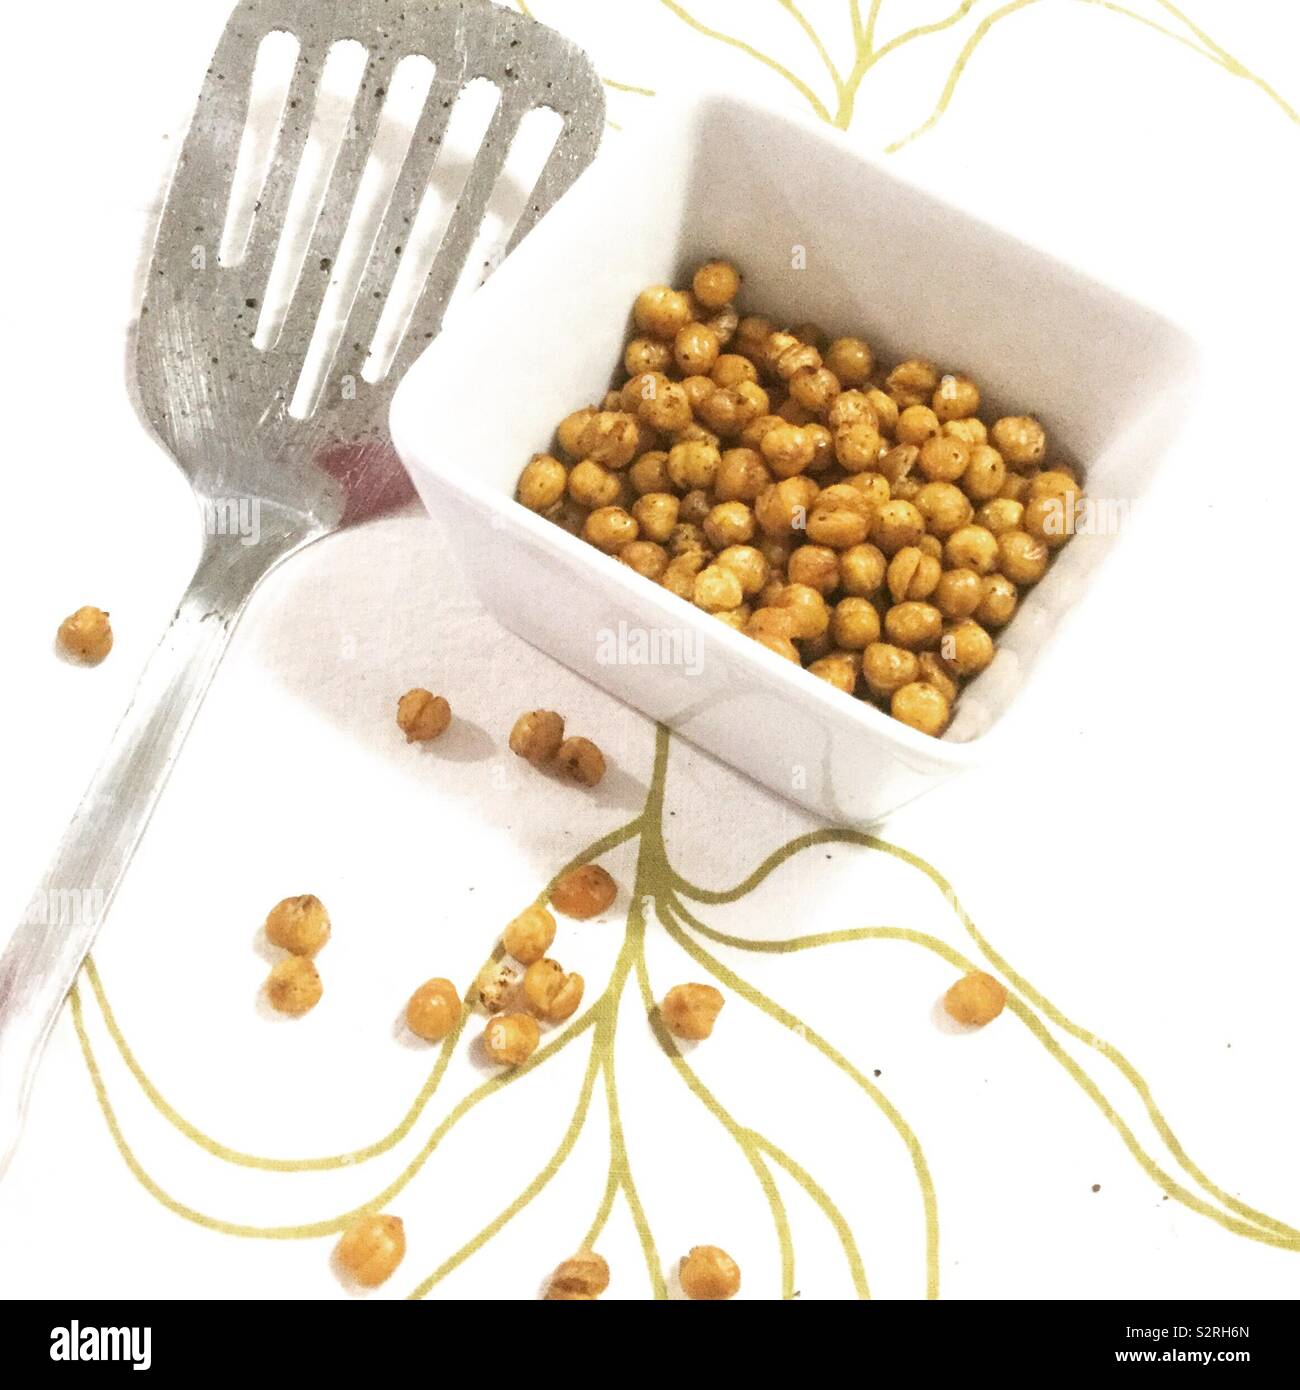 Oven Roasted Chick Peas Stock Photo